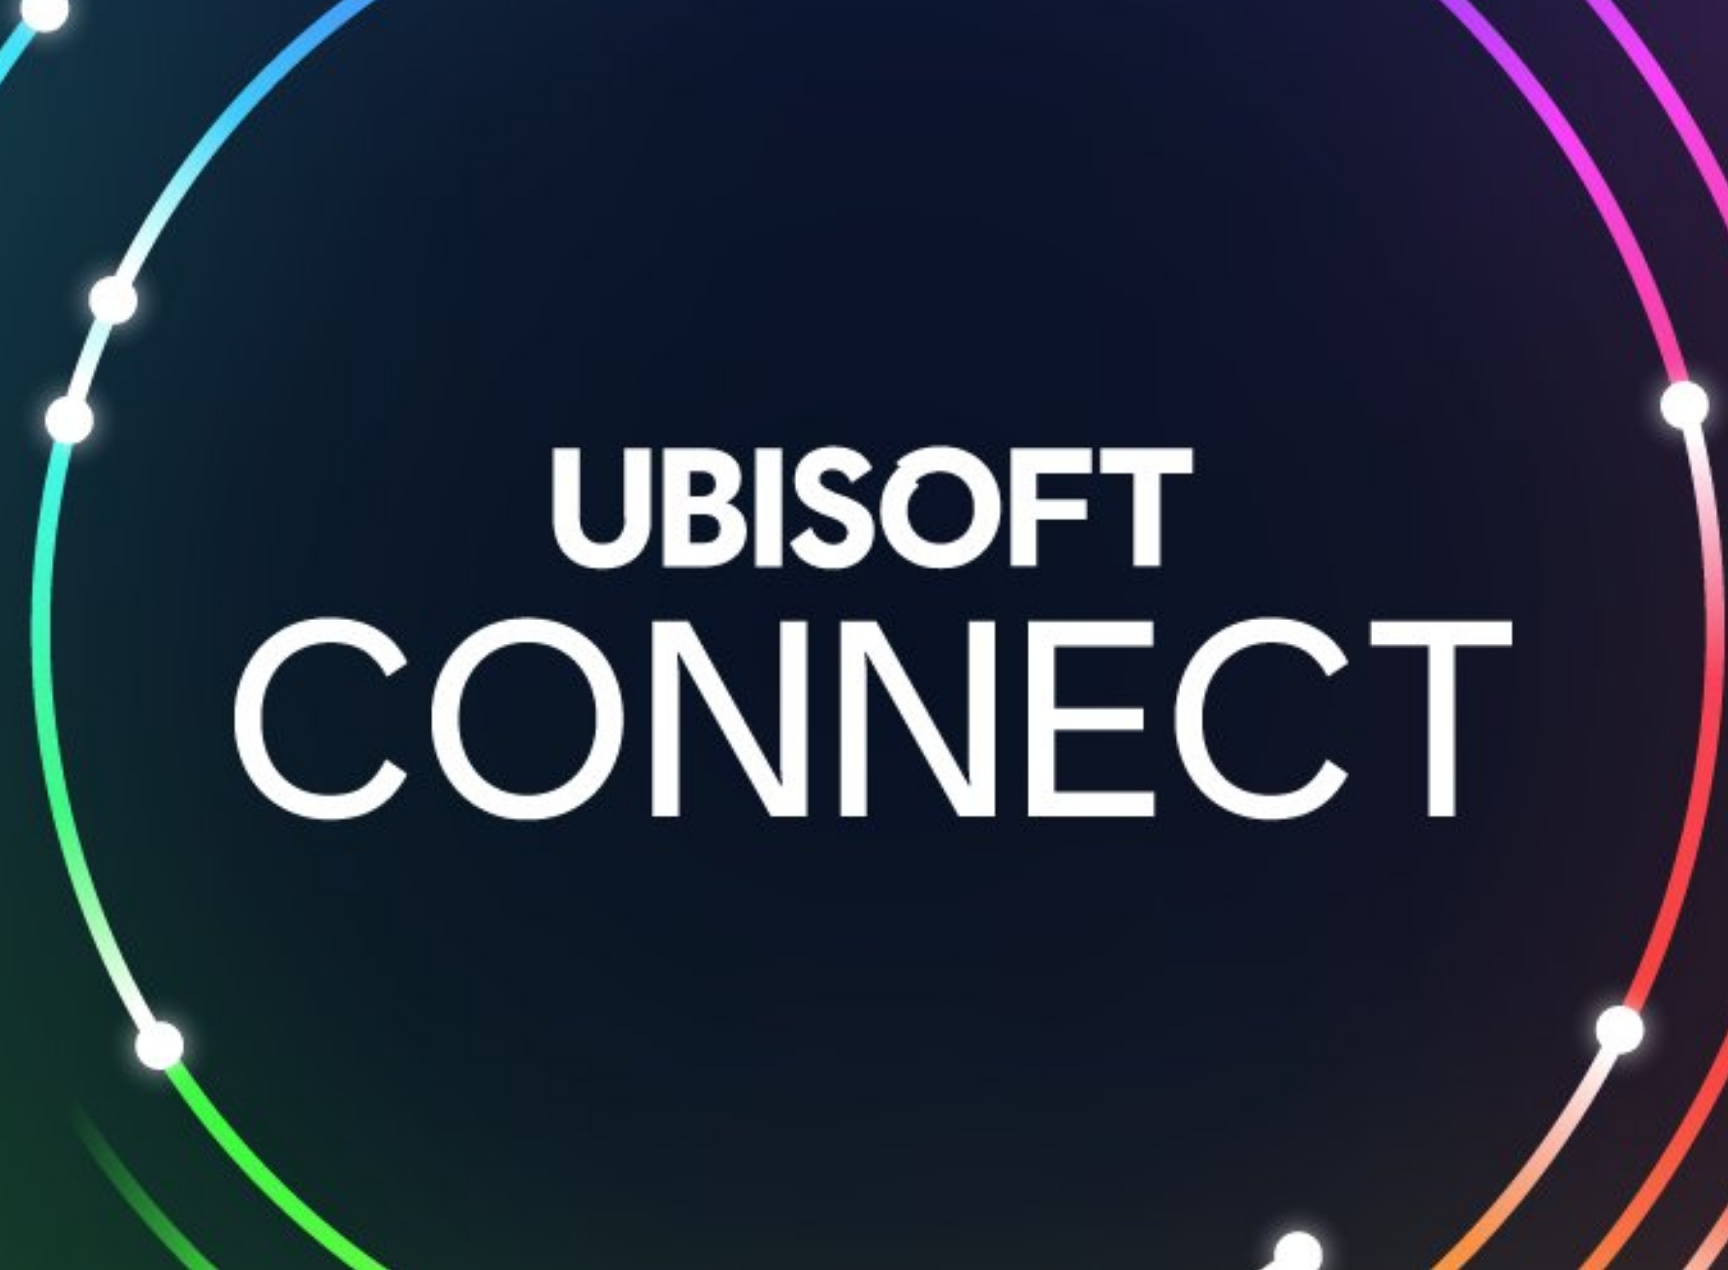 download the last version for ipod Ubisoft Connect (Uplay) 2023.09.05